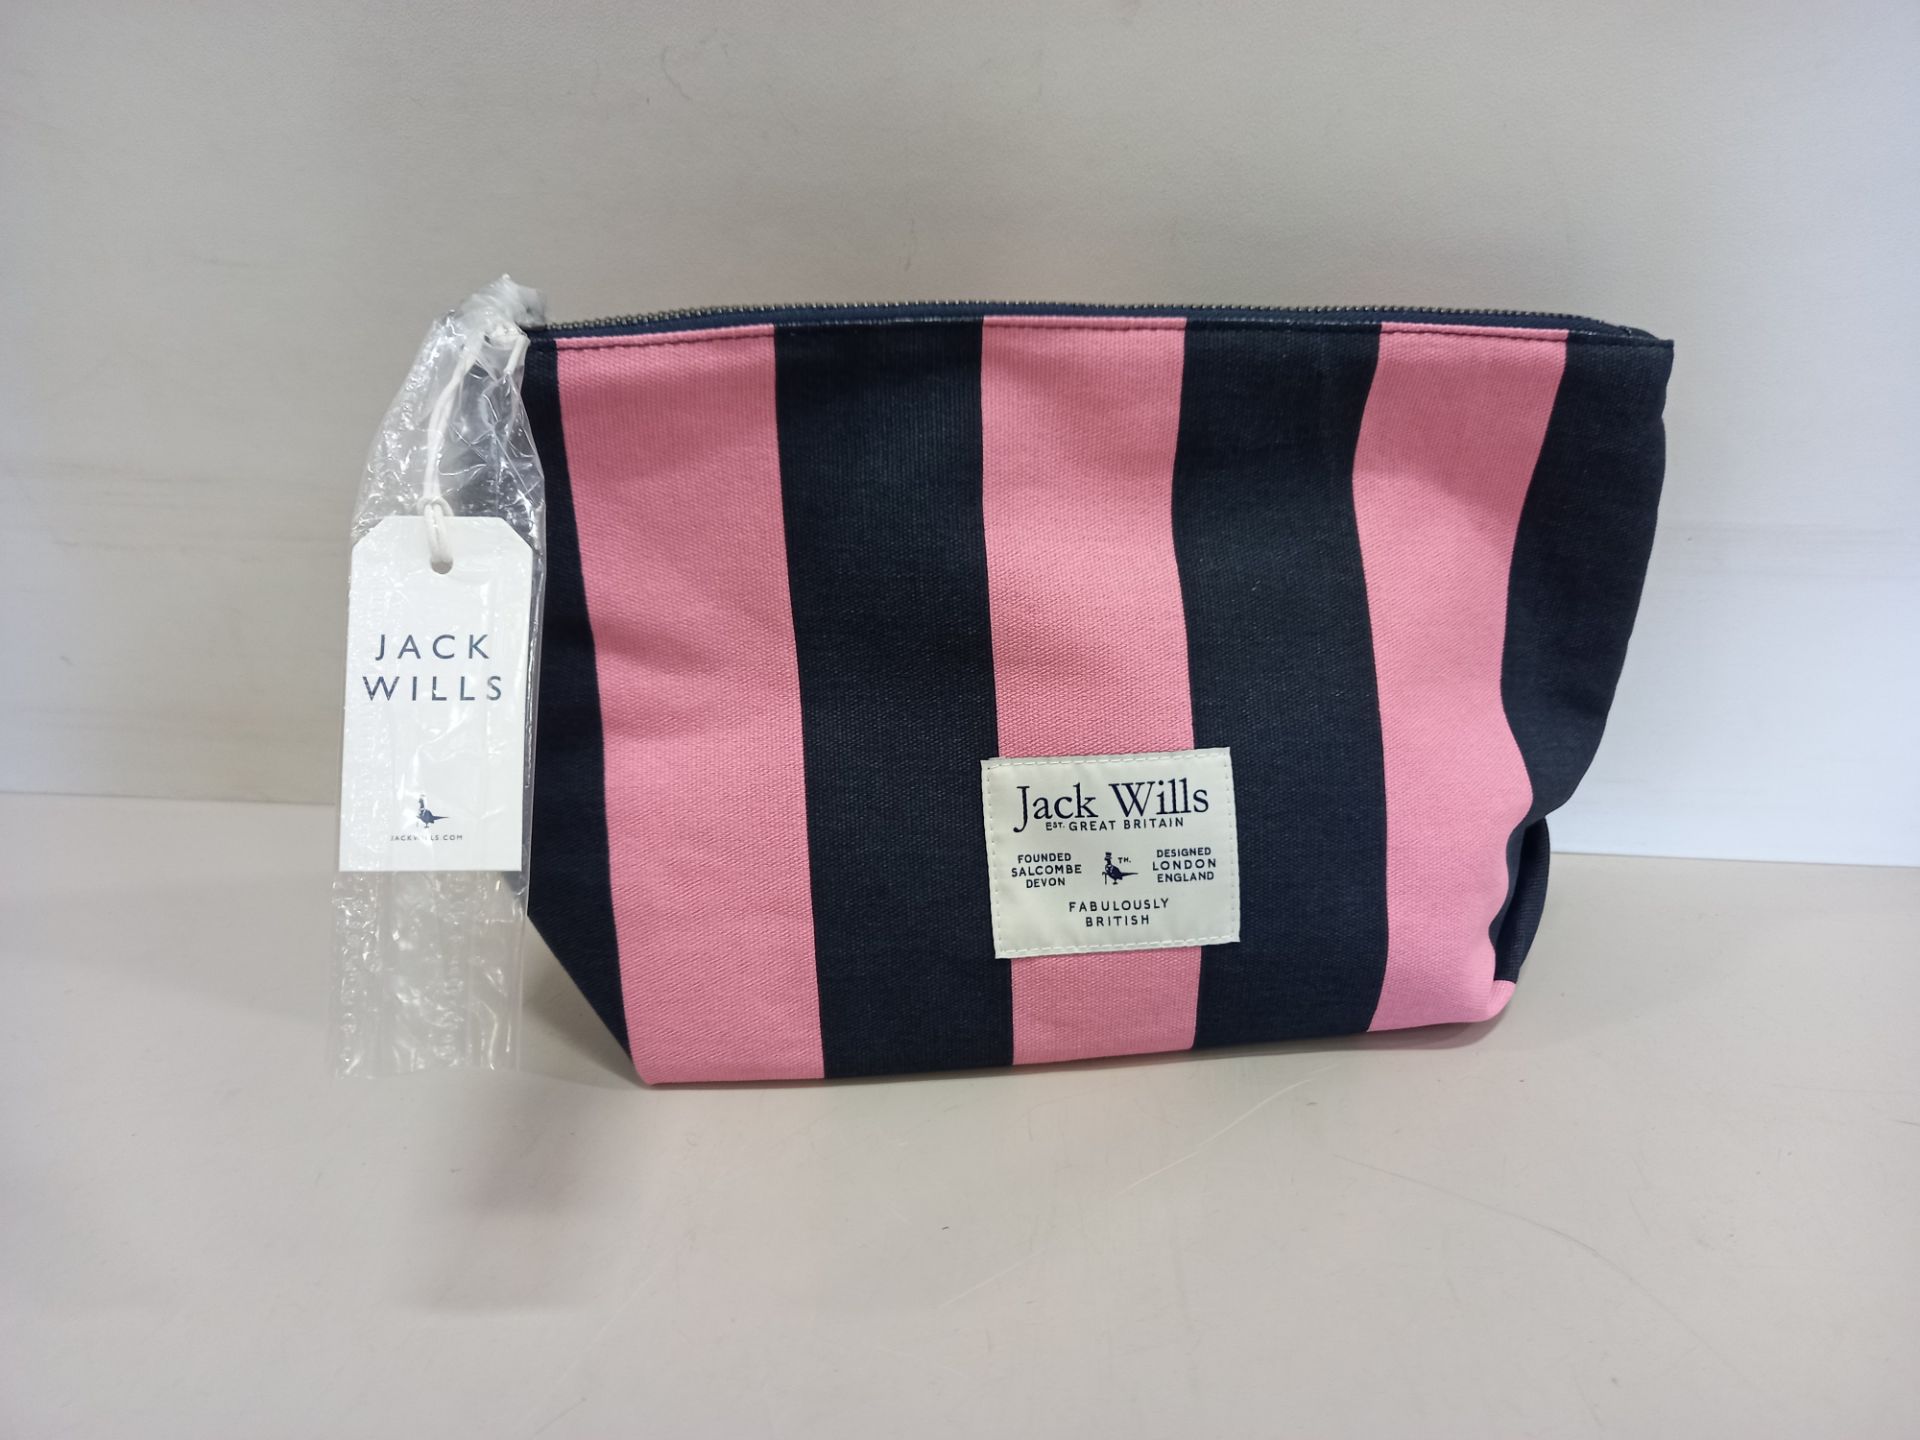 15 X BRAND NEW JACK WILLS HAYLE LARGE POUCH BAGS IN PINK / BLACK STRIPE WITH SWING TICKETS RRP £24.